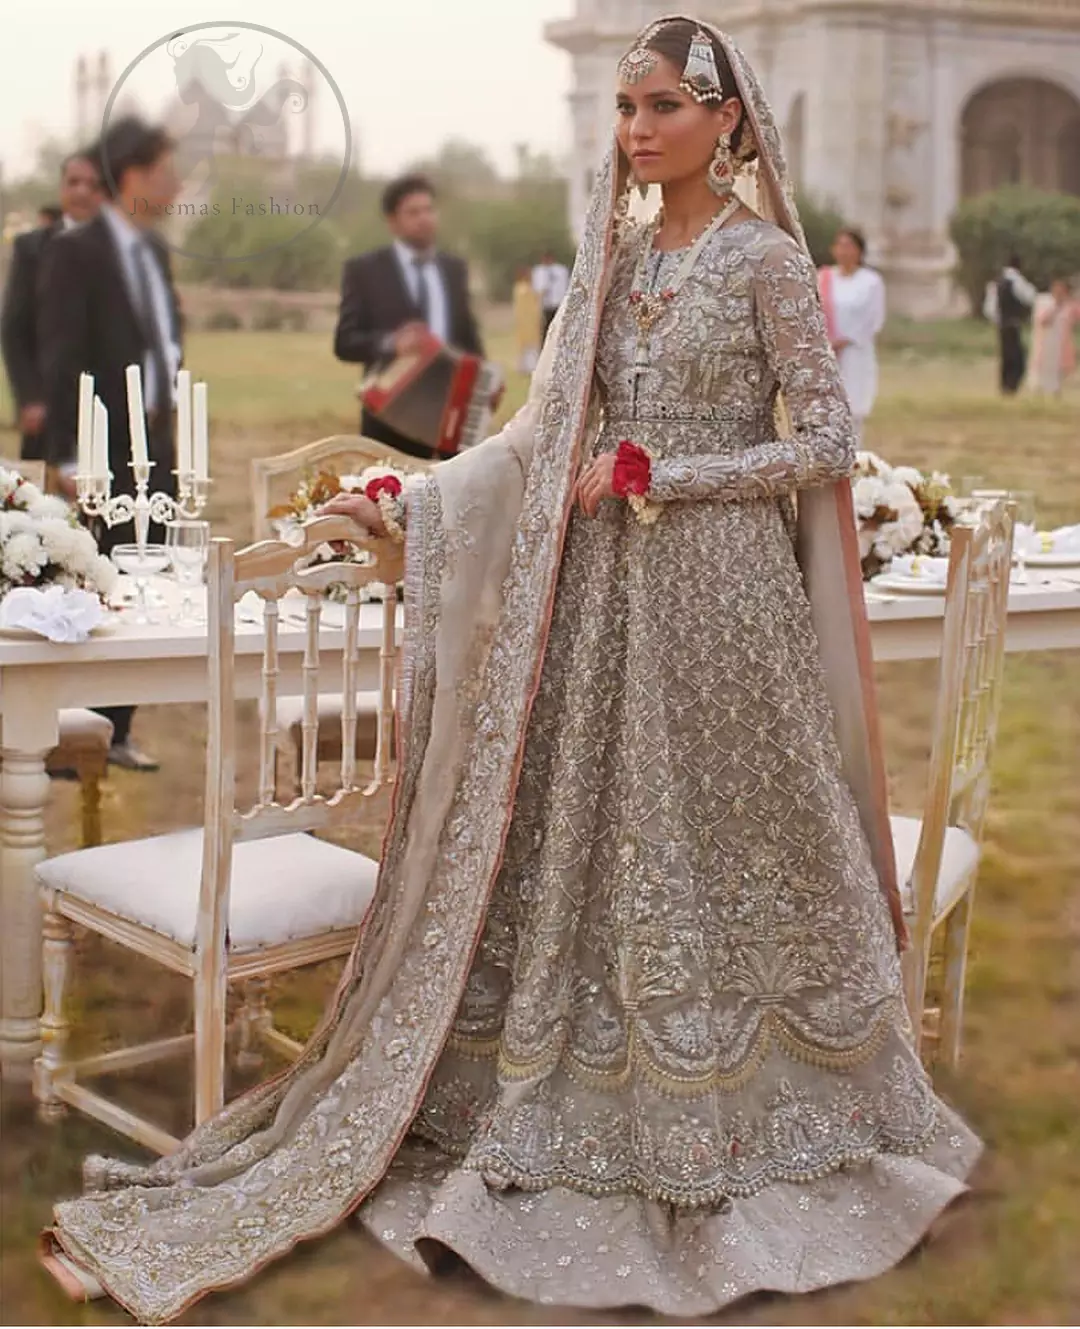 This outfit is a timeless beauty.It is heavily embellished with silver gold kora dabka, Sequins and swaronski crystals.This exquisite Pishwas is fully decorated with floral motifs patterns all over it.It is further enhanced with Foral thread embroidery.The trimming border of pishwas is ornamented with small golden pearls. It comes with embellished lehengha which has small sized sprinkled floral motifs all over.This Outfit is beautifully coordinated with matching Dupatta with heavy embroidered borders.